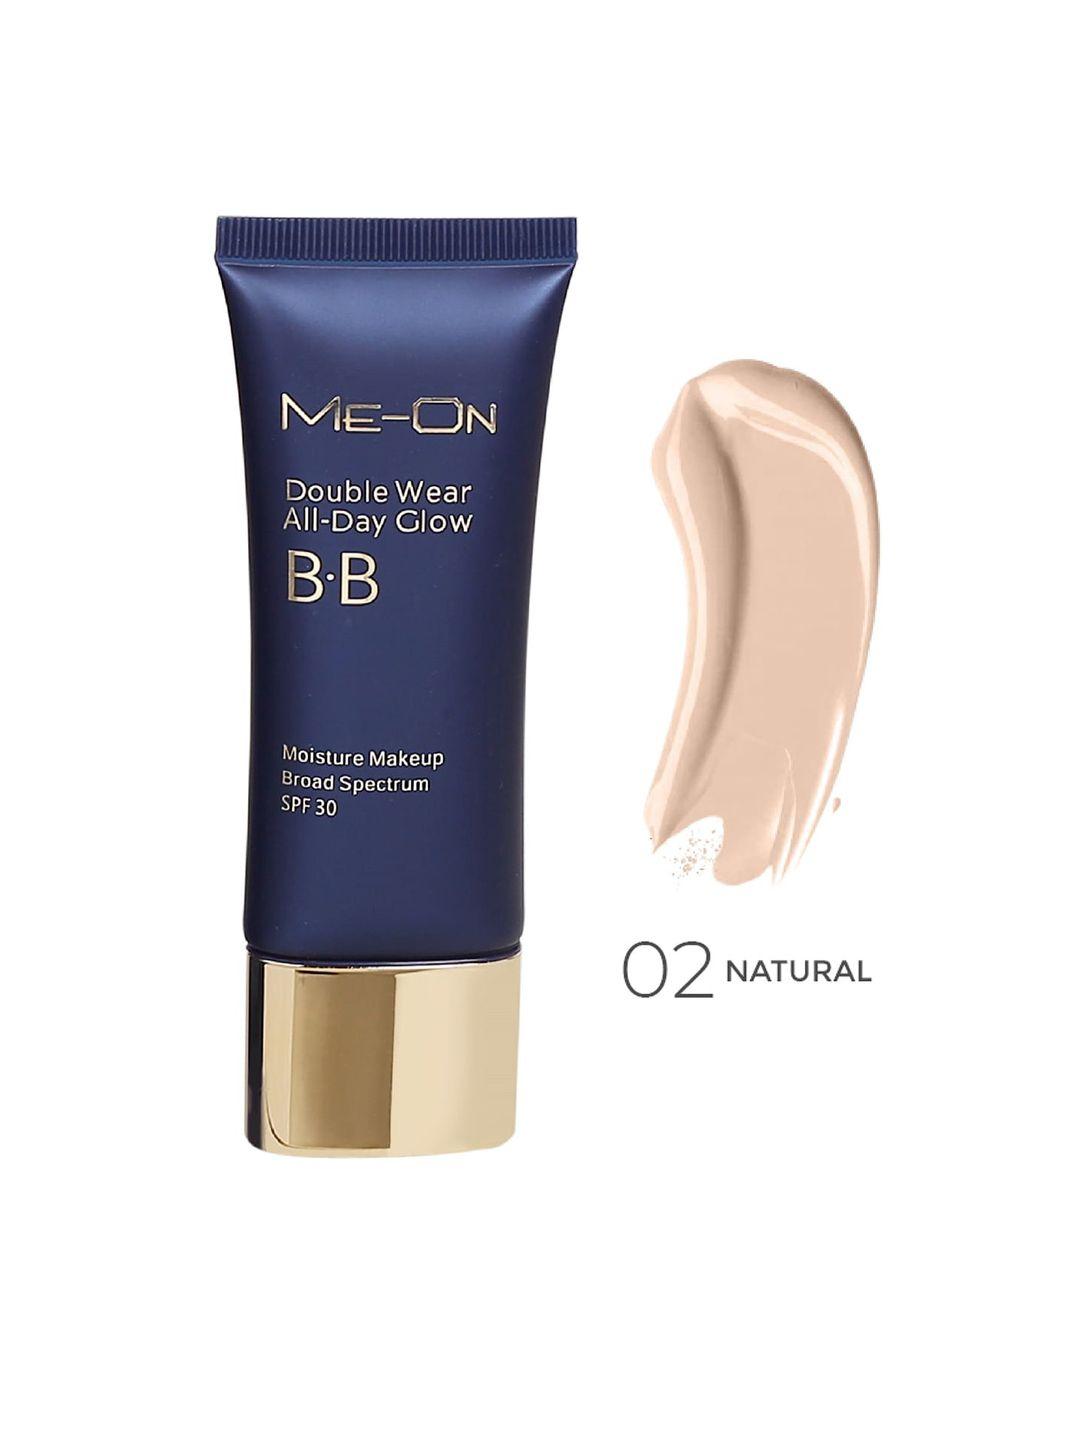 me-on double wear all-day glow spf30 bb cream foundation - shade 02